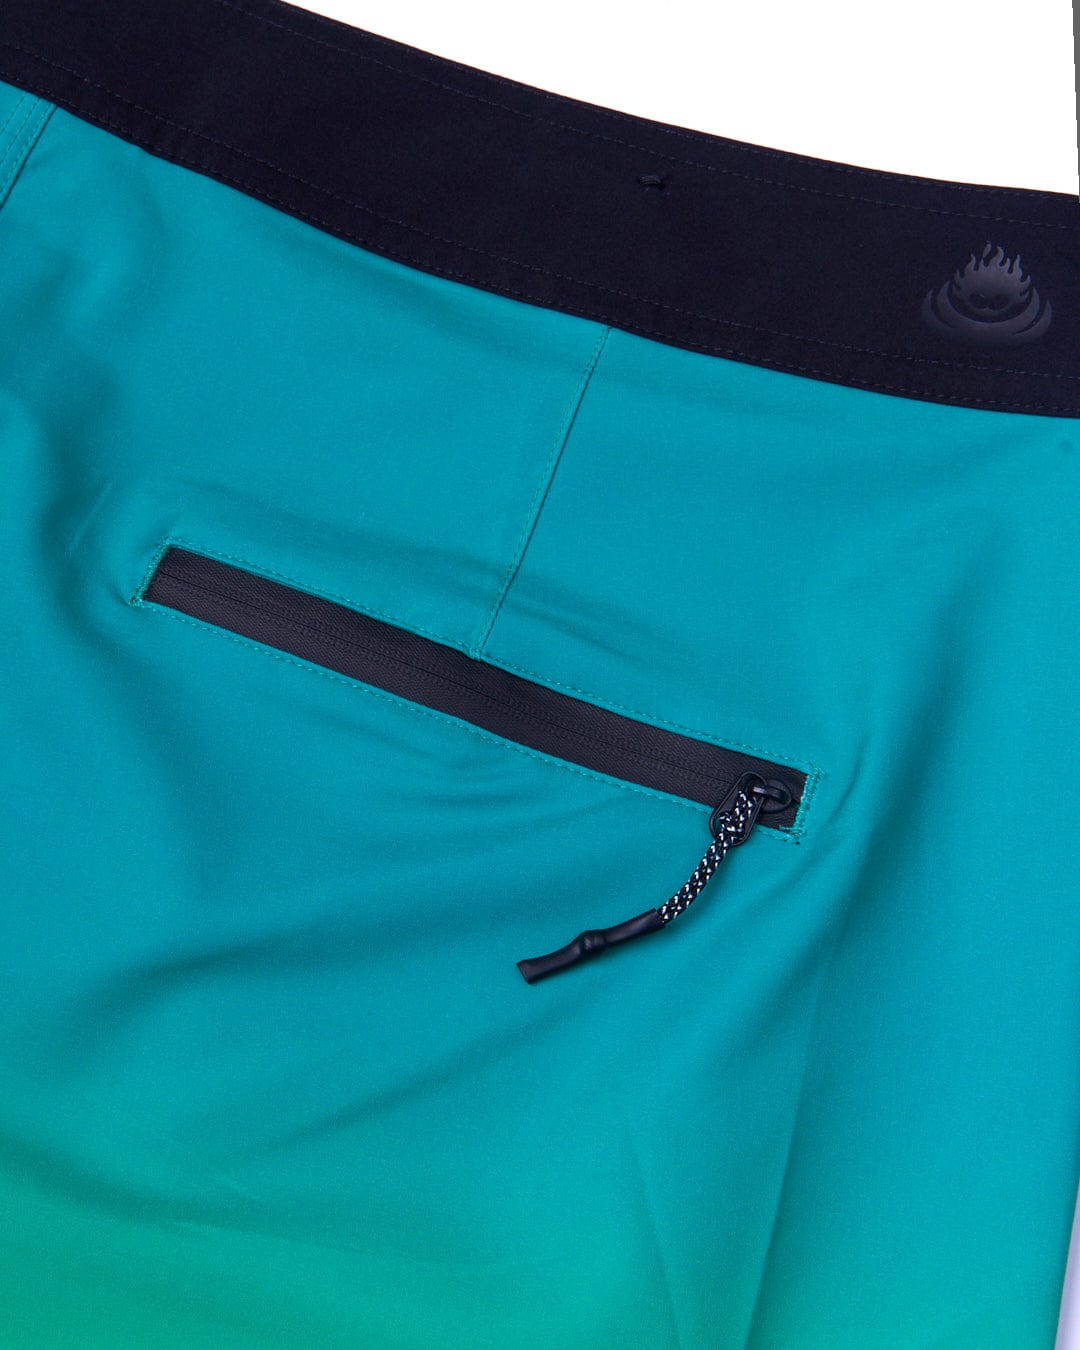 A Saltrock Geo Palms - Mens Boardshorts - Green with a zipper pocket in an ombre palm print design.